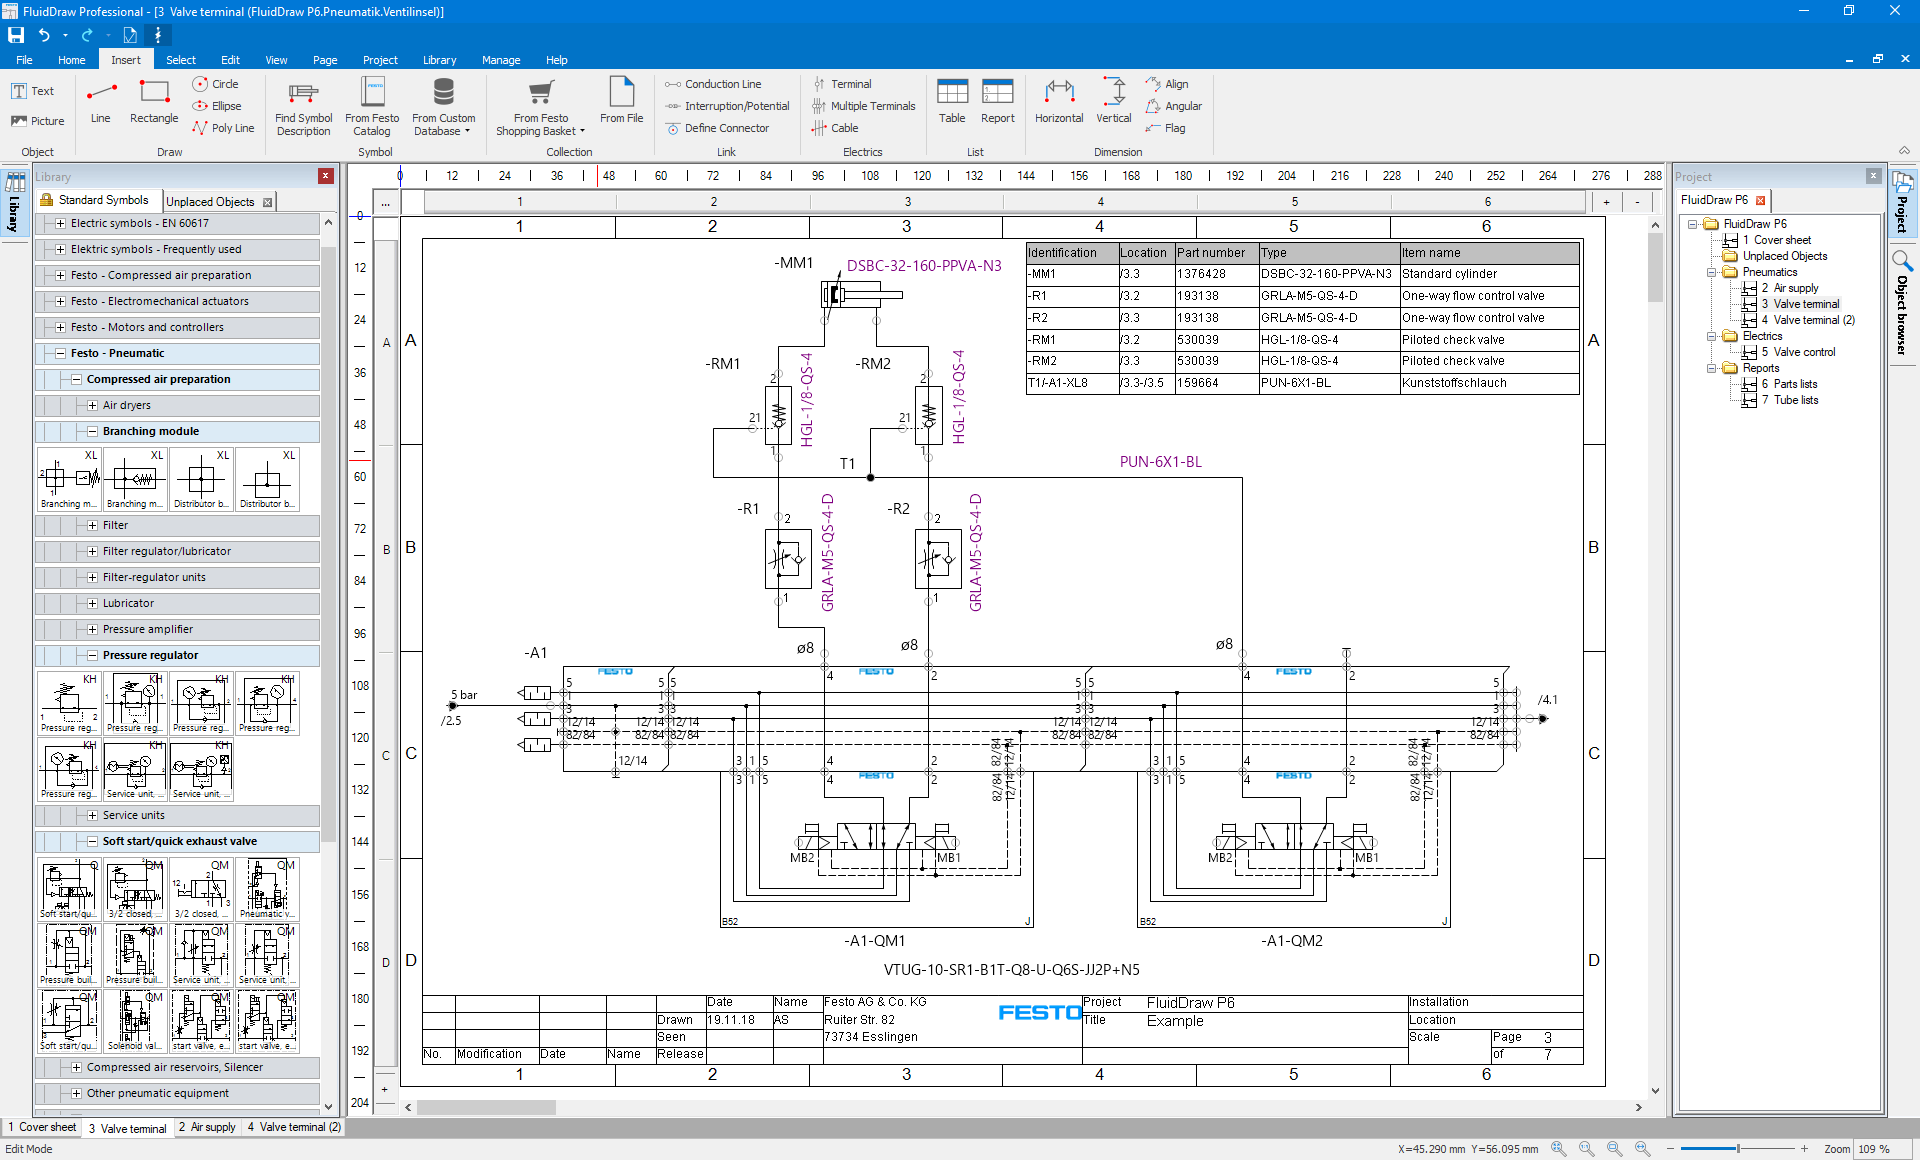 Snapshot of a FluidCAD project